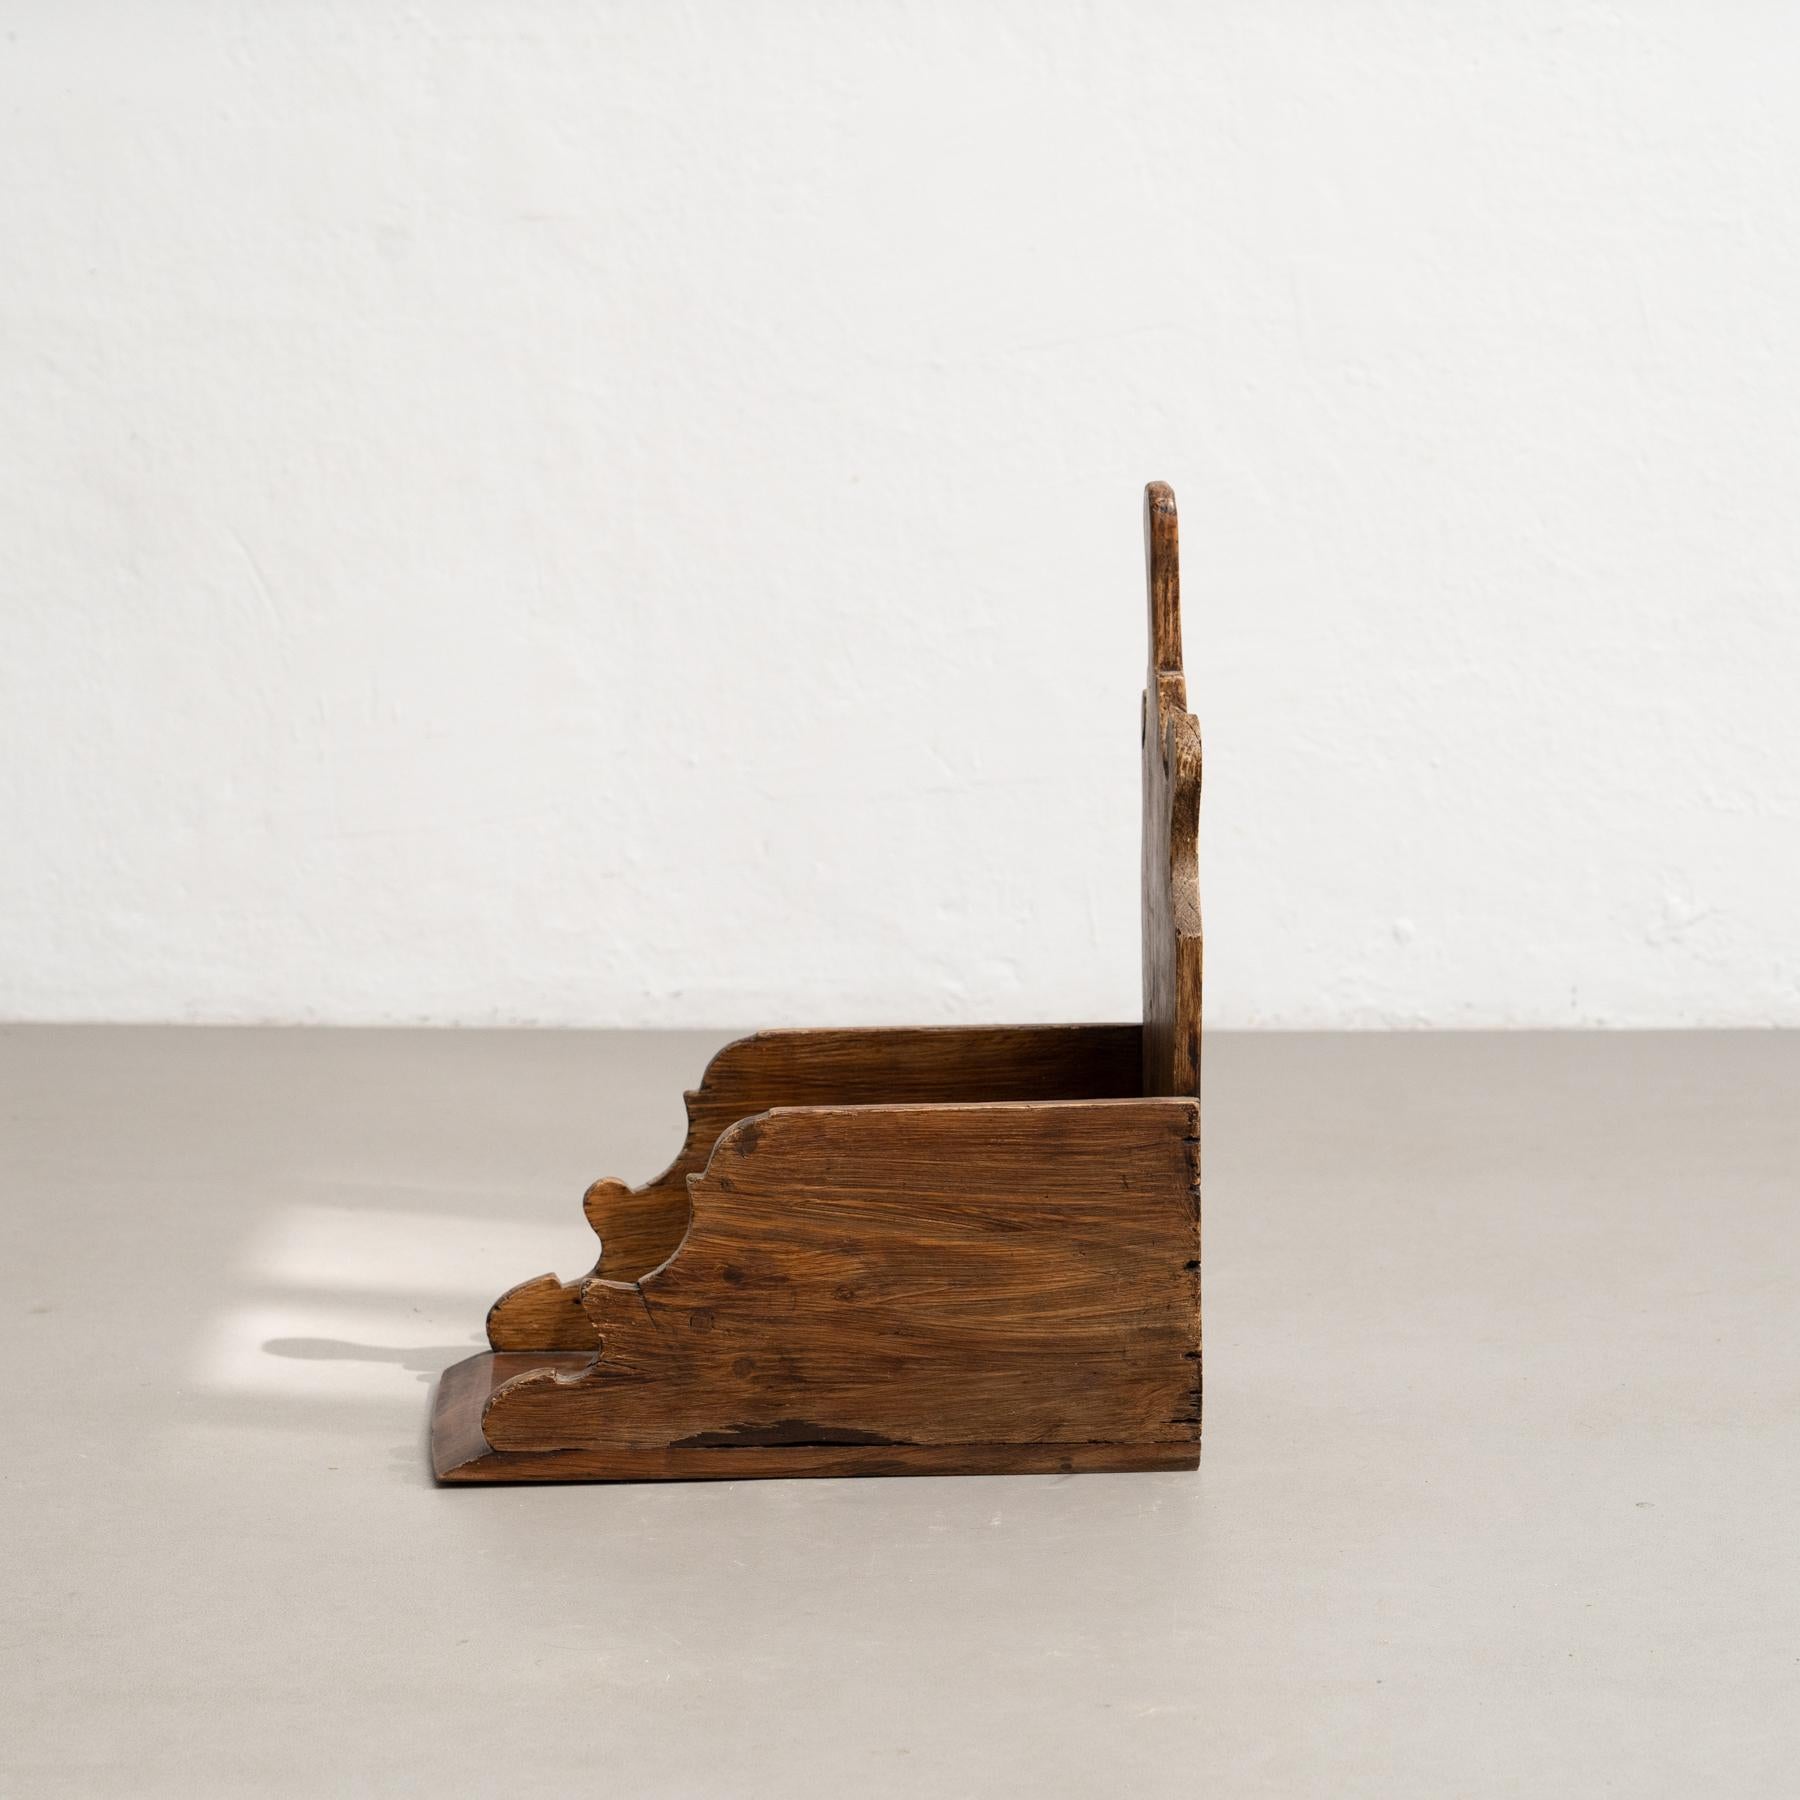 Early 20th Century Rustic Sculptural Wood Broom Dustpan For Sale 1